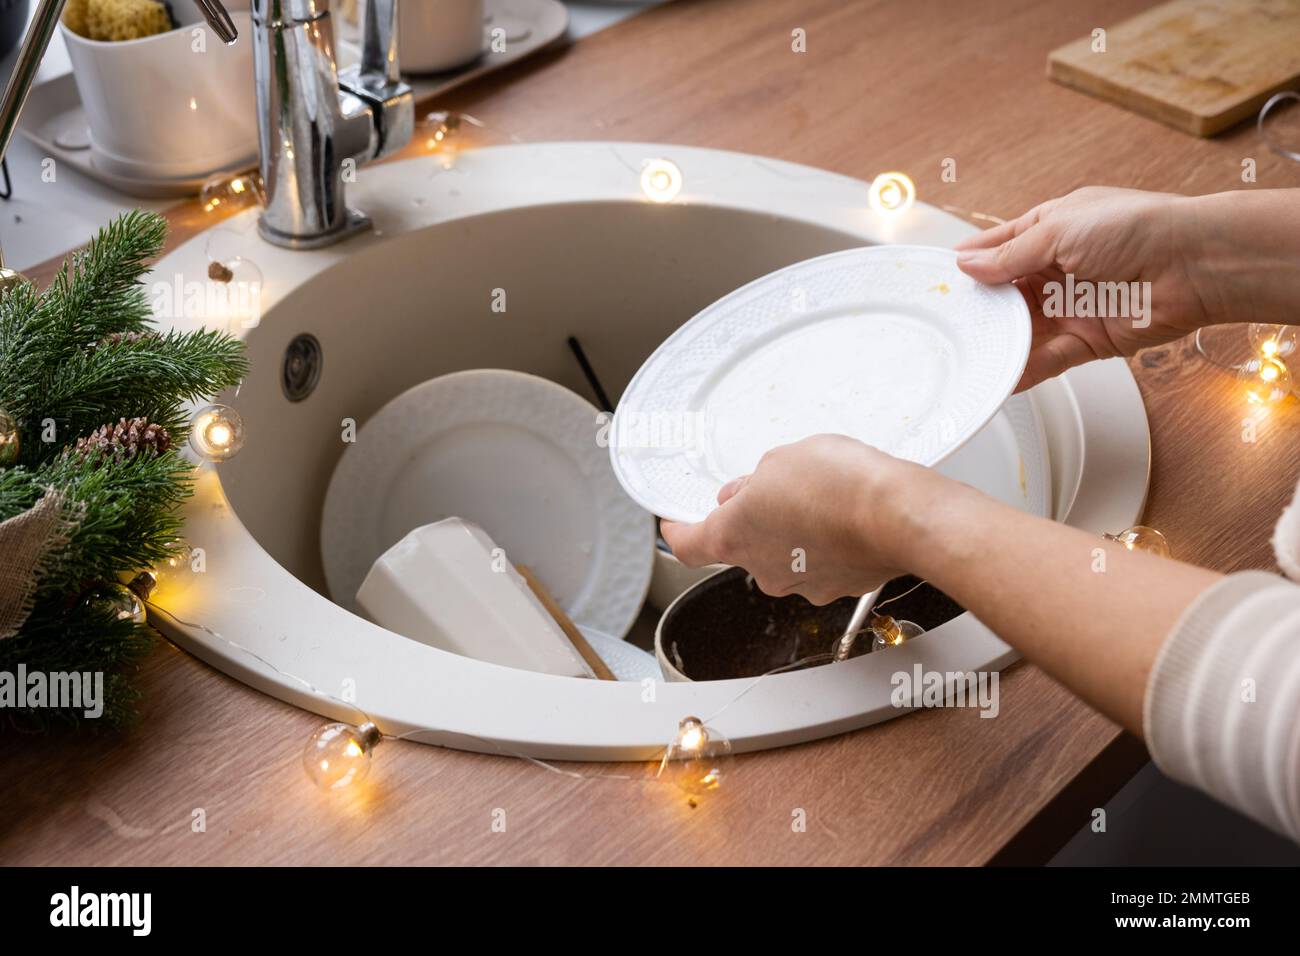 Victorian Kitchen Maid Washing Dishes In Sink. Stock Photo, Picture and  Royalty Free Image. Image 67536884.